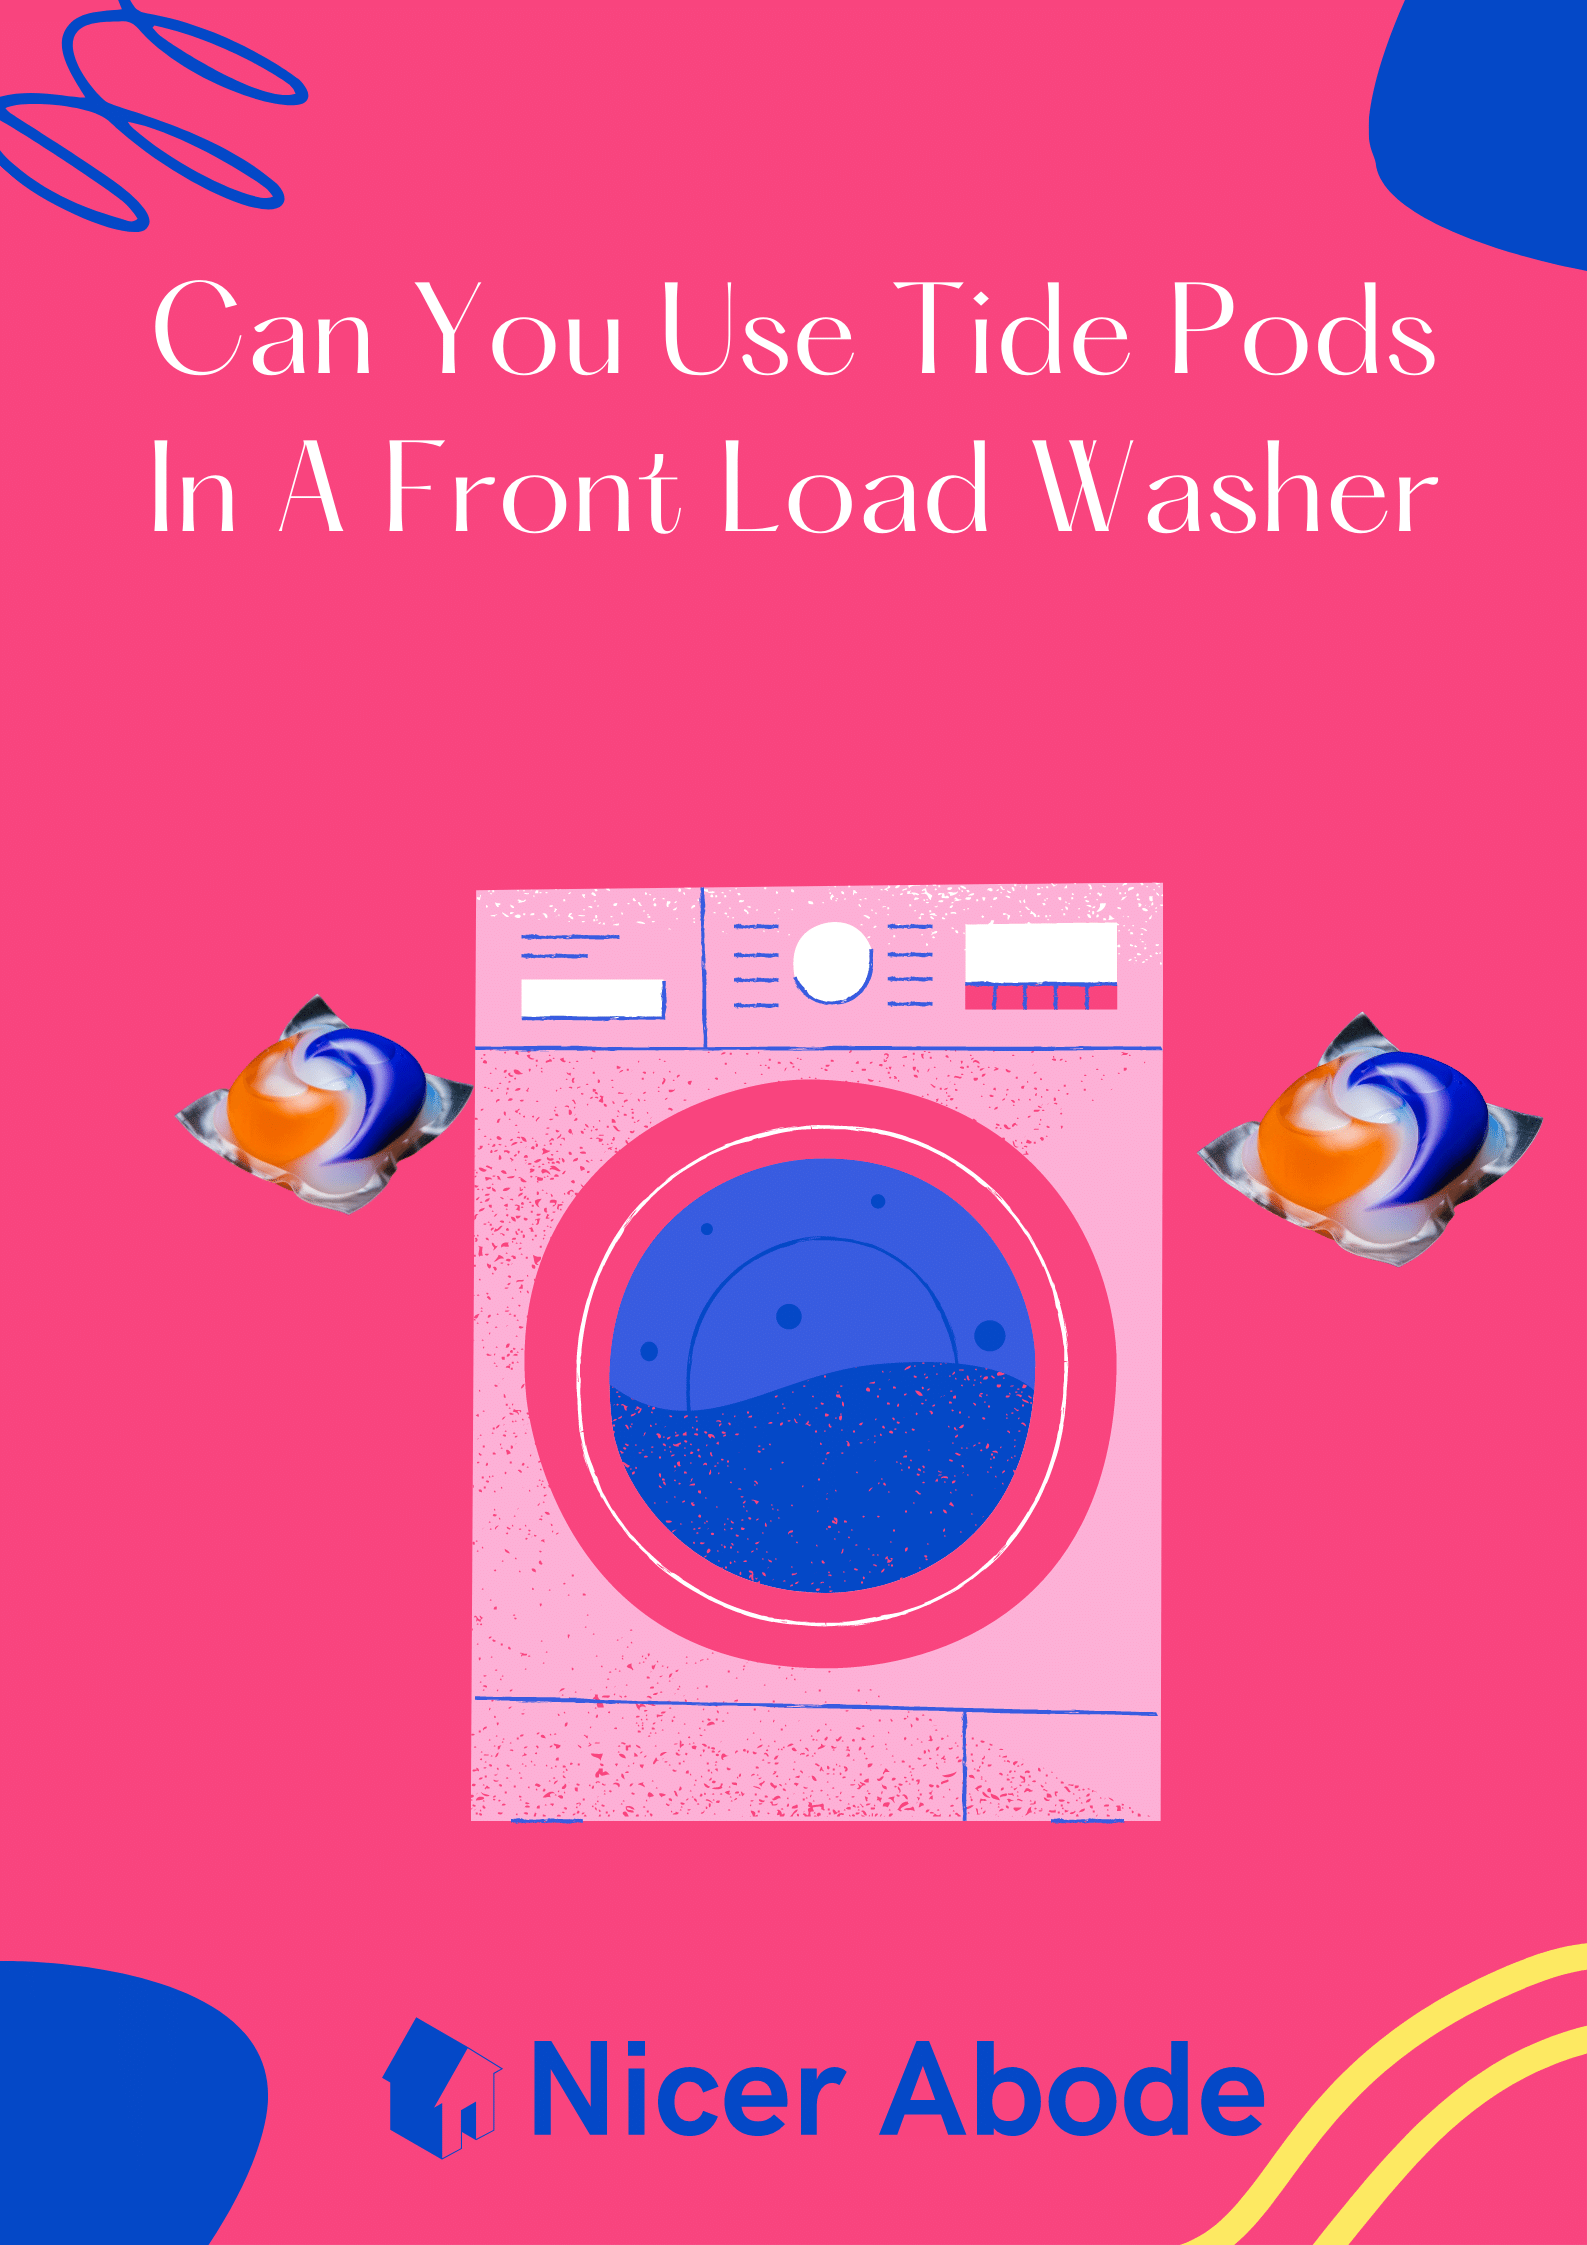 Can-You-Use-Tide-Pods-In-A-Front-Load-Washer